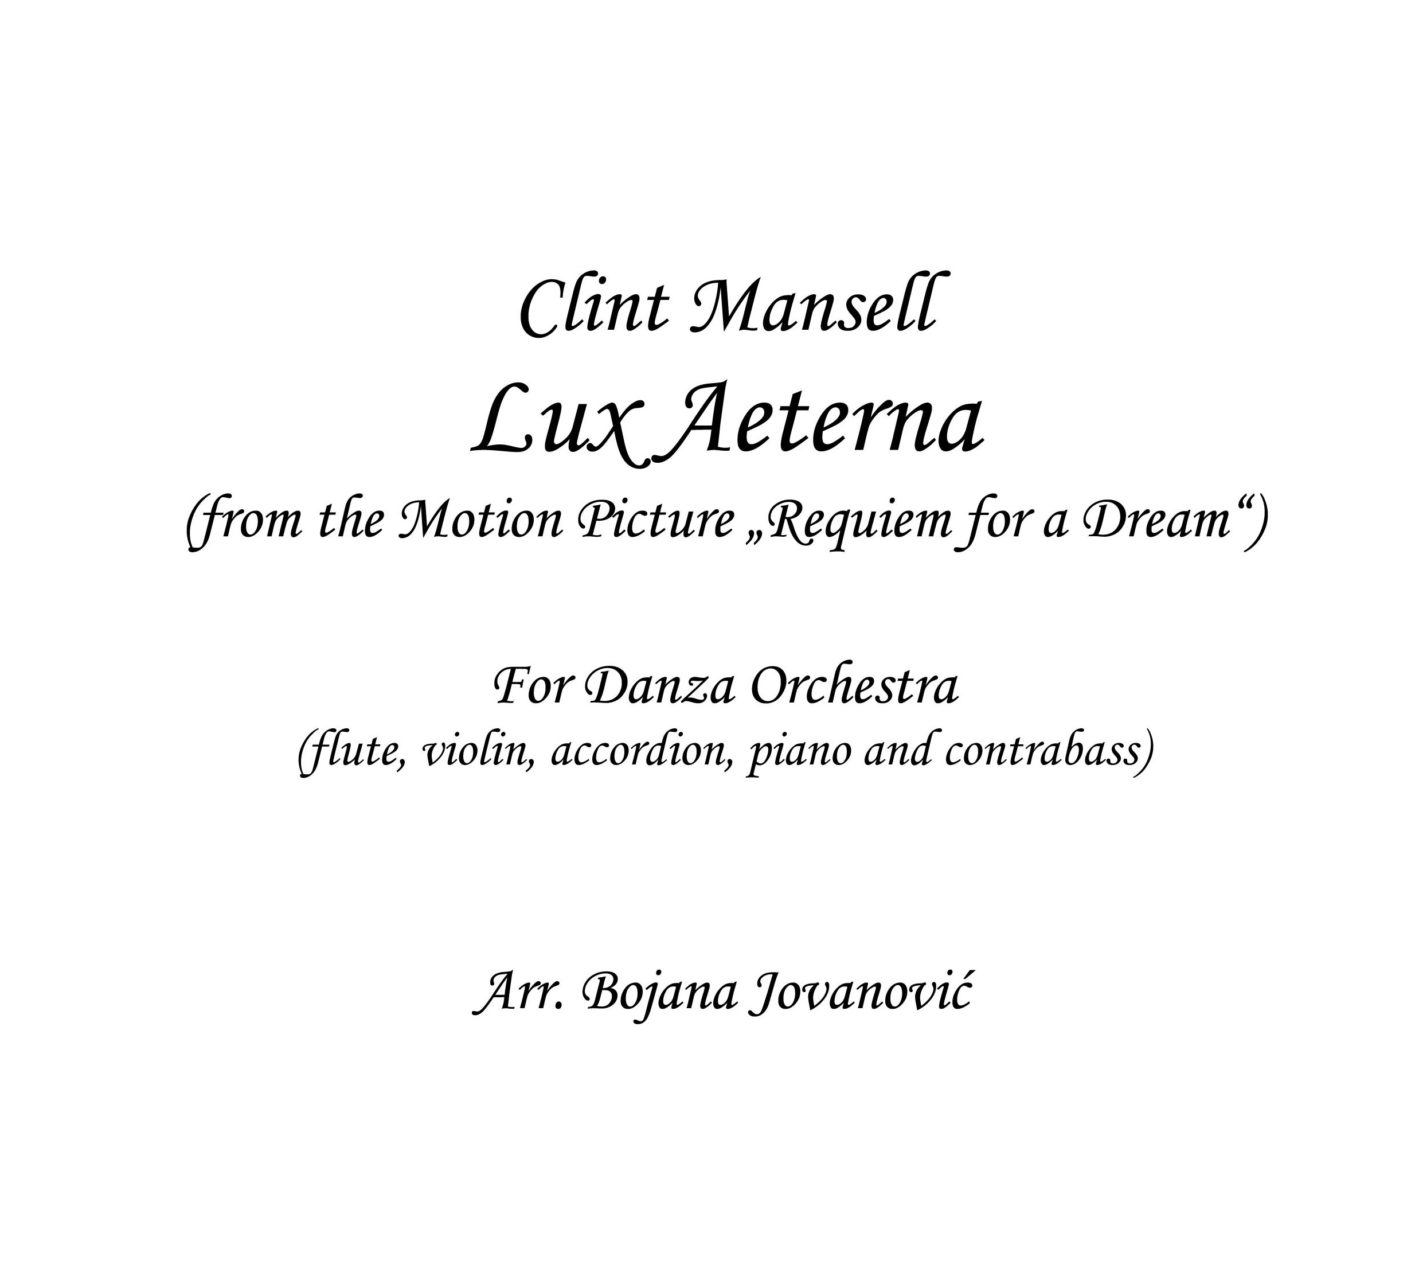 Voorganger capaciteit Surrey Lux Aeterna Sheet music - Clint Mansell - Flute - Violin - Accordion -  Piano - Bass